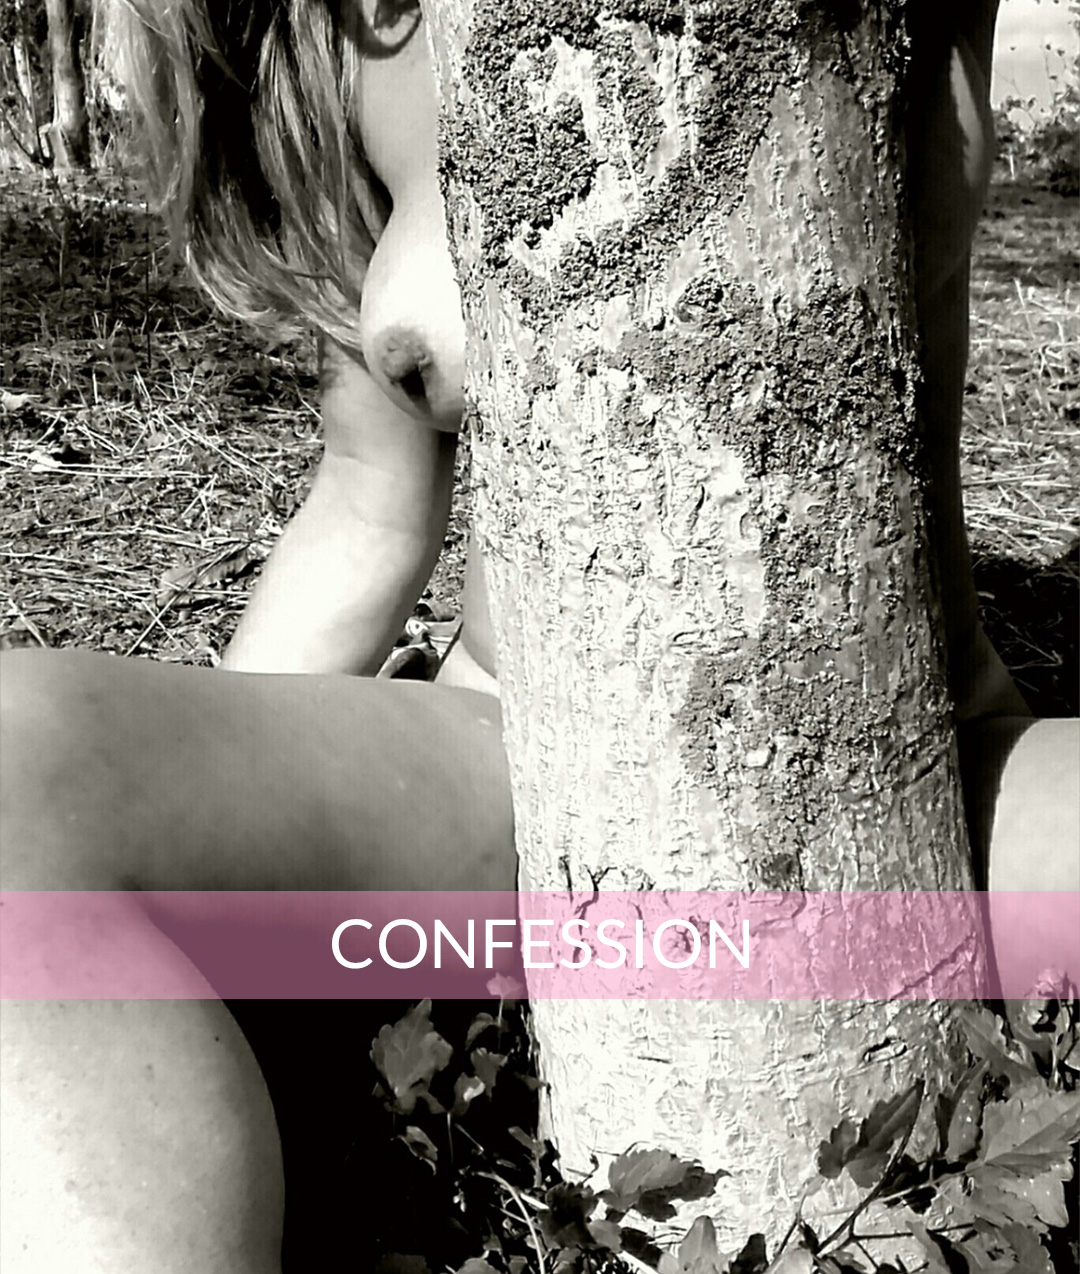 My readers real sex story confessions from couples and women image photo